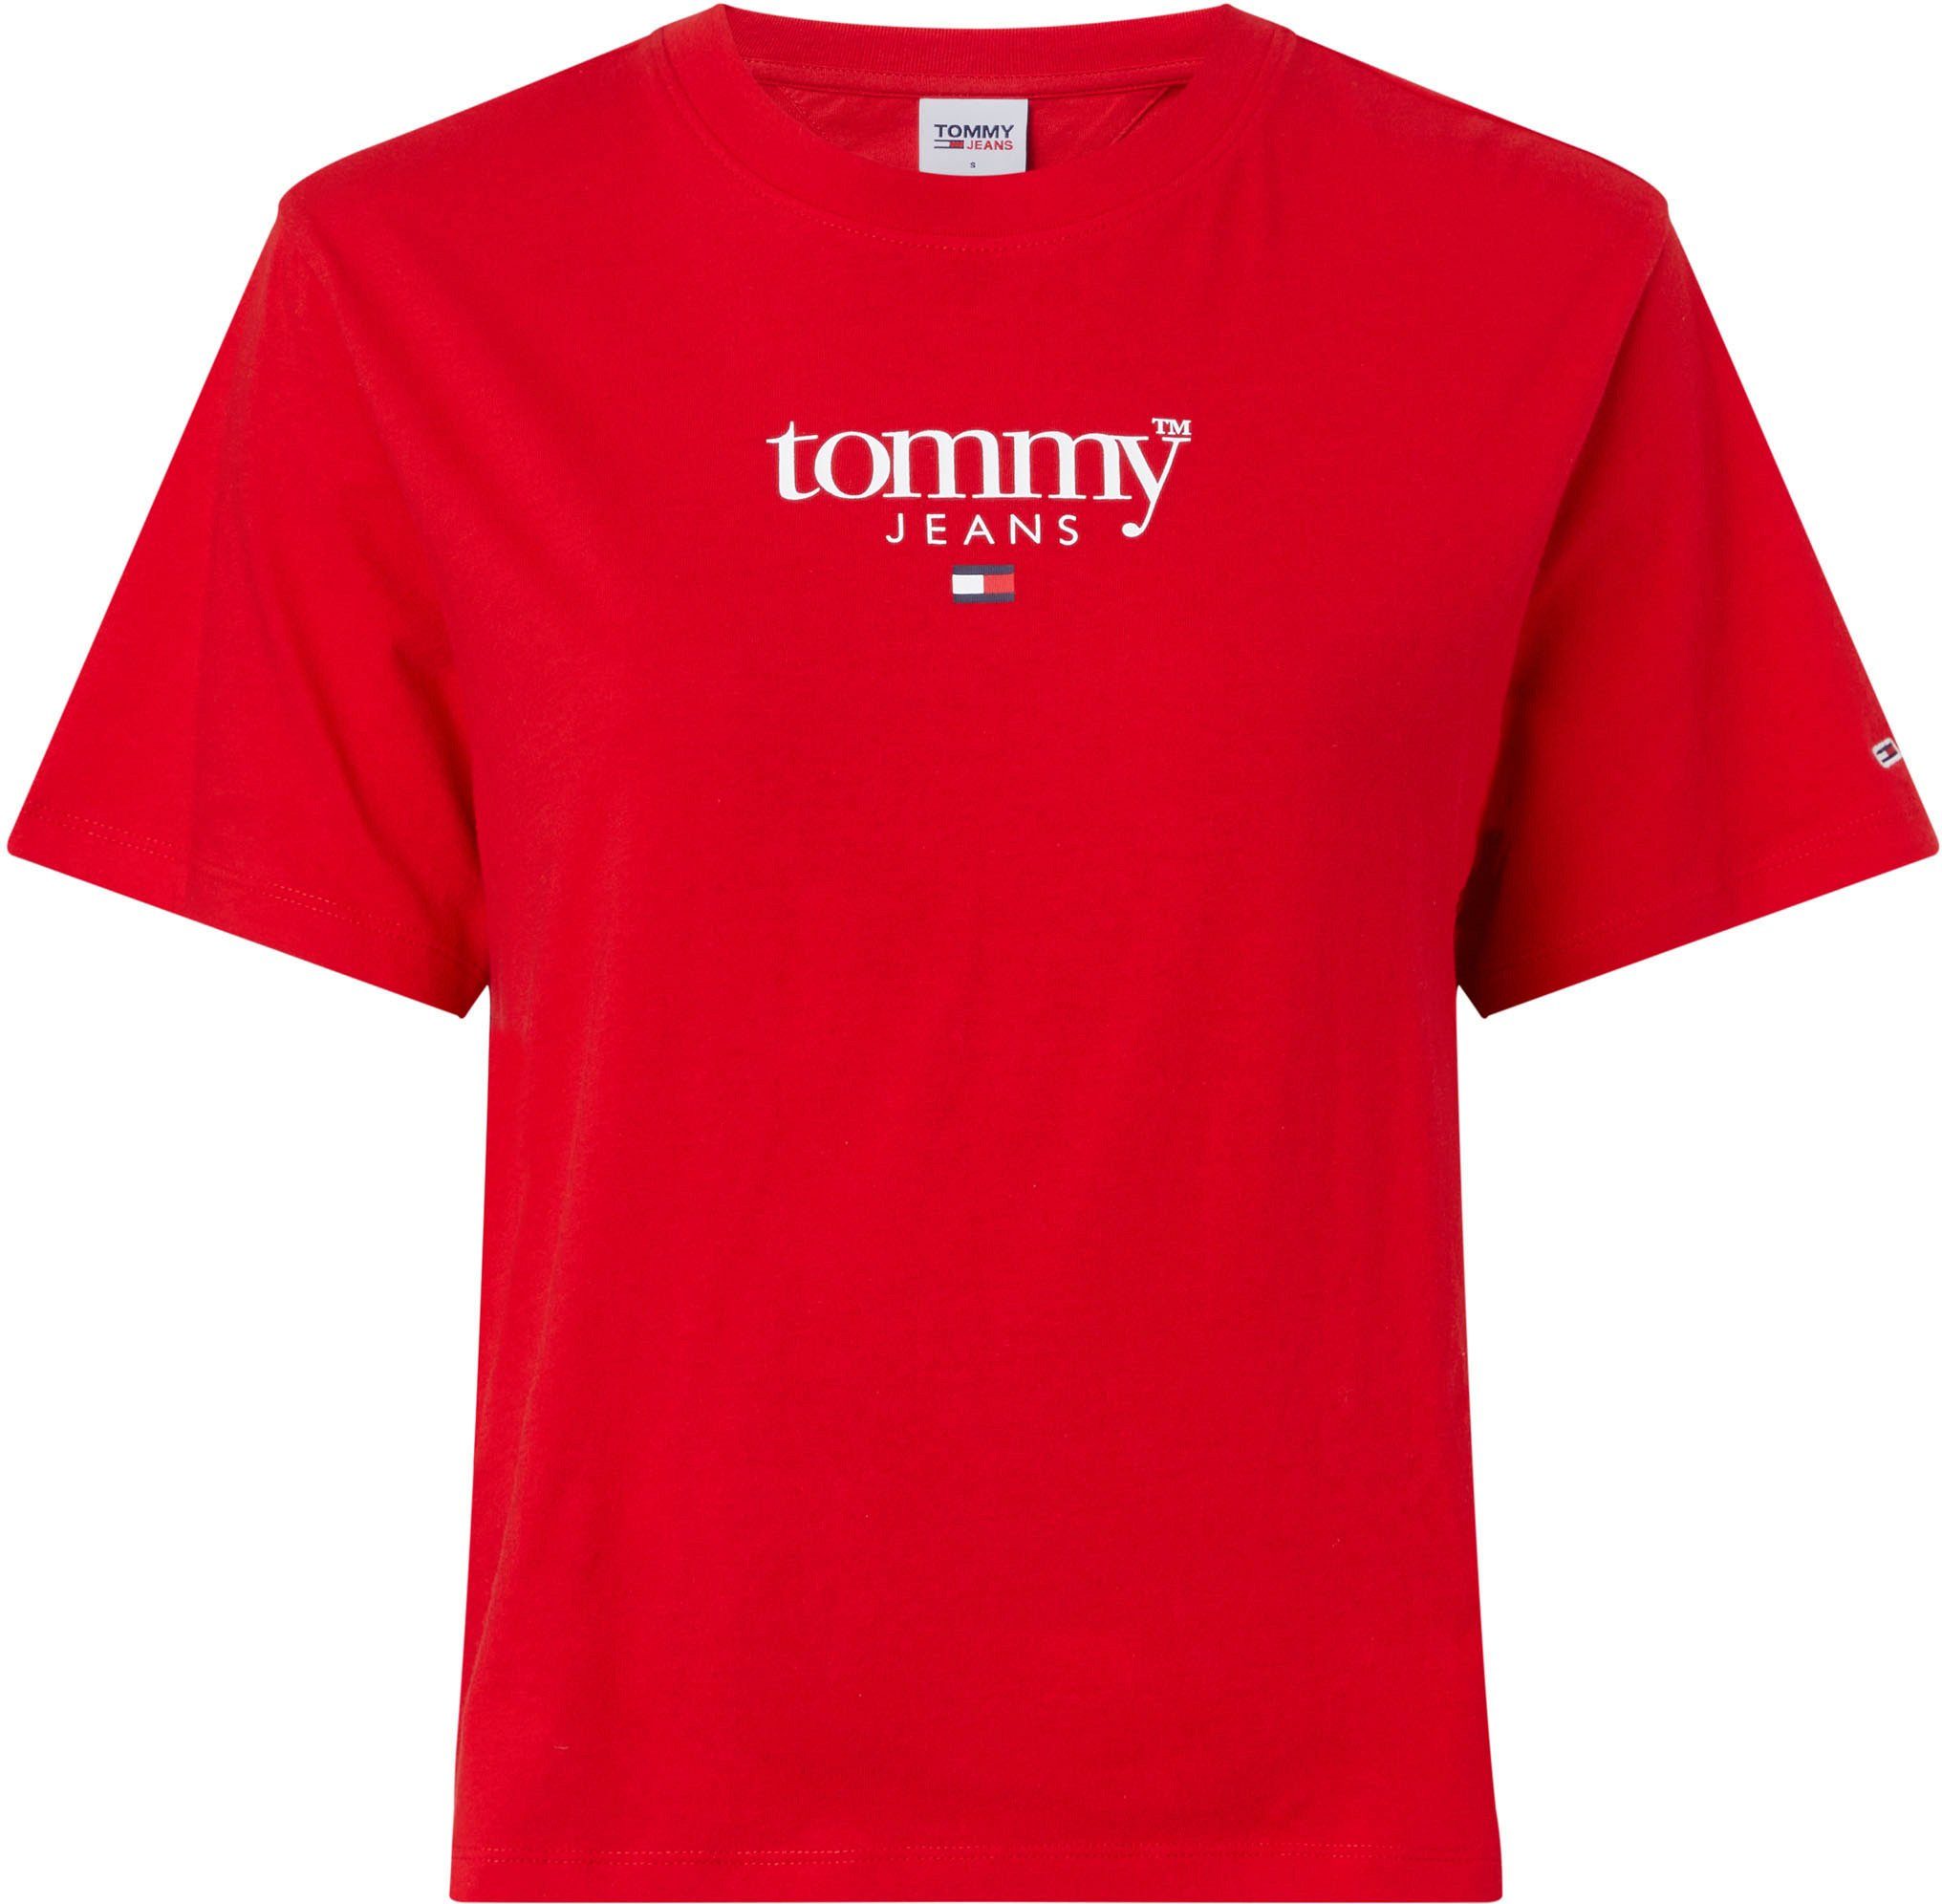 1 TJW ESSENTIAL Kurzarmshirt mit Tommy Jeans LOGO Logo-Flag gestickter SS Tommy hellrot Jeans CLASSIC